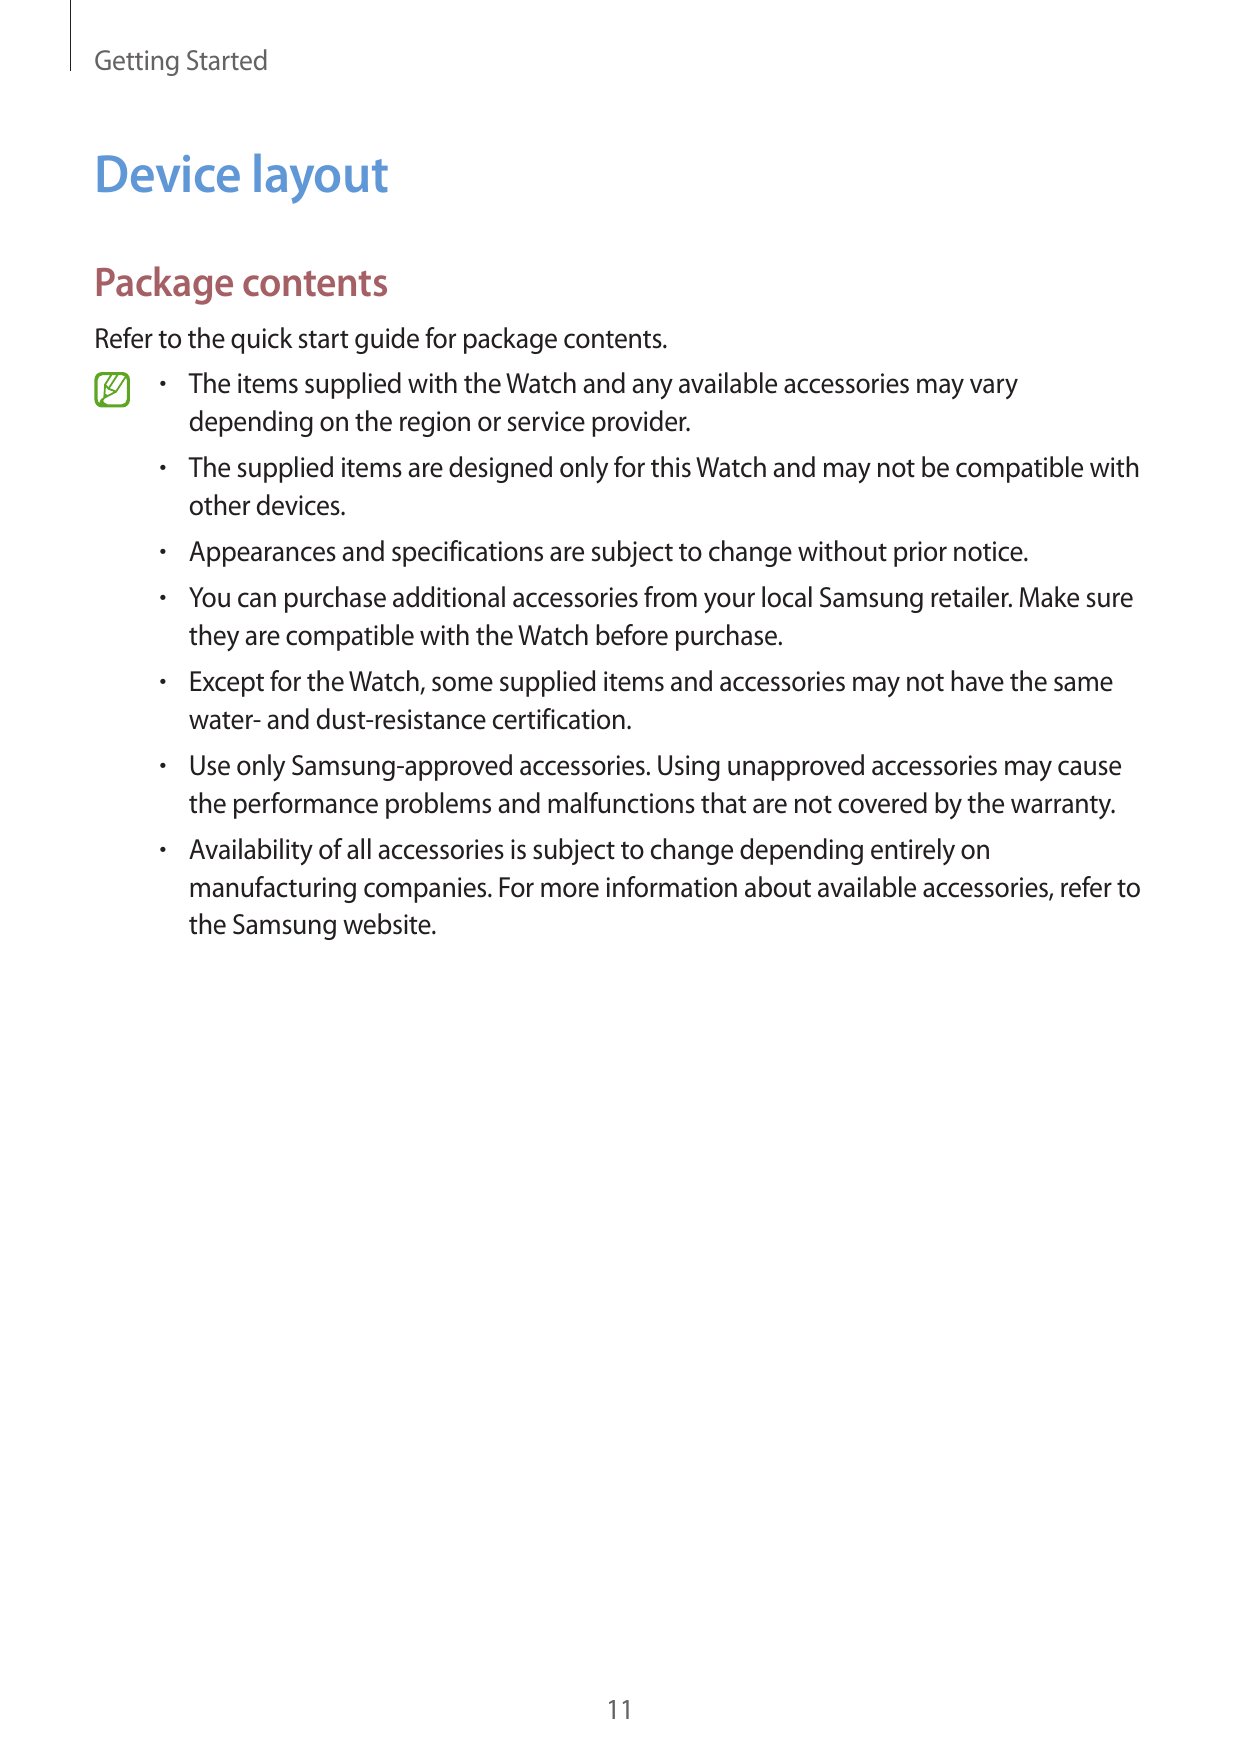 Getting StartedDevice layoutPackage contentsRefer to the quick start guide for package contents.• The items supplied with the Wa